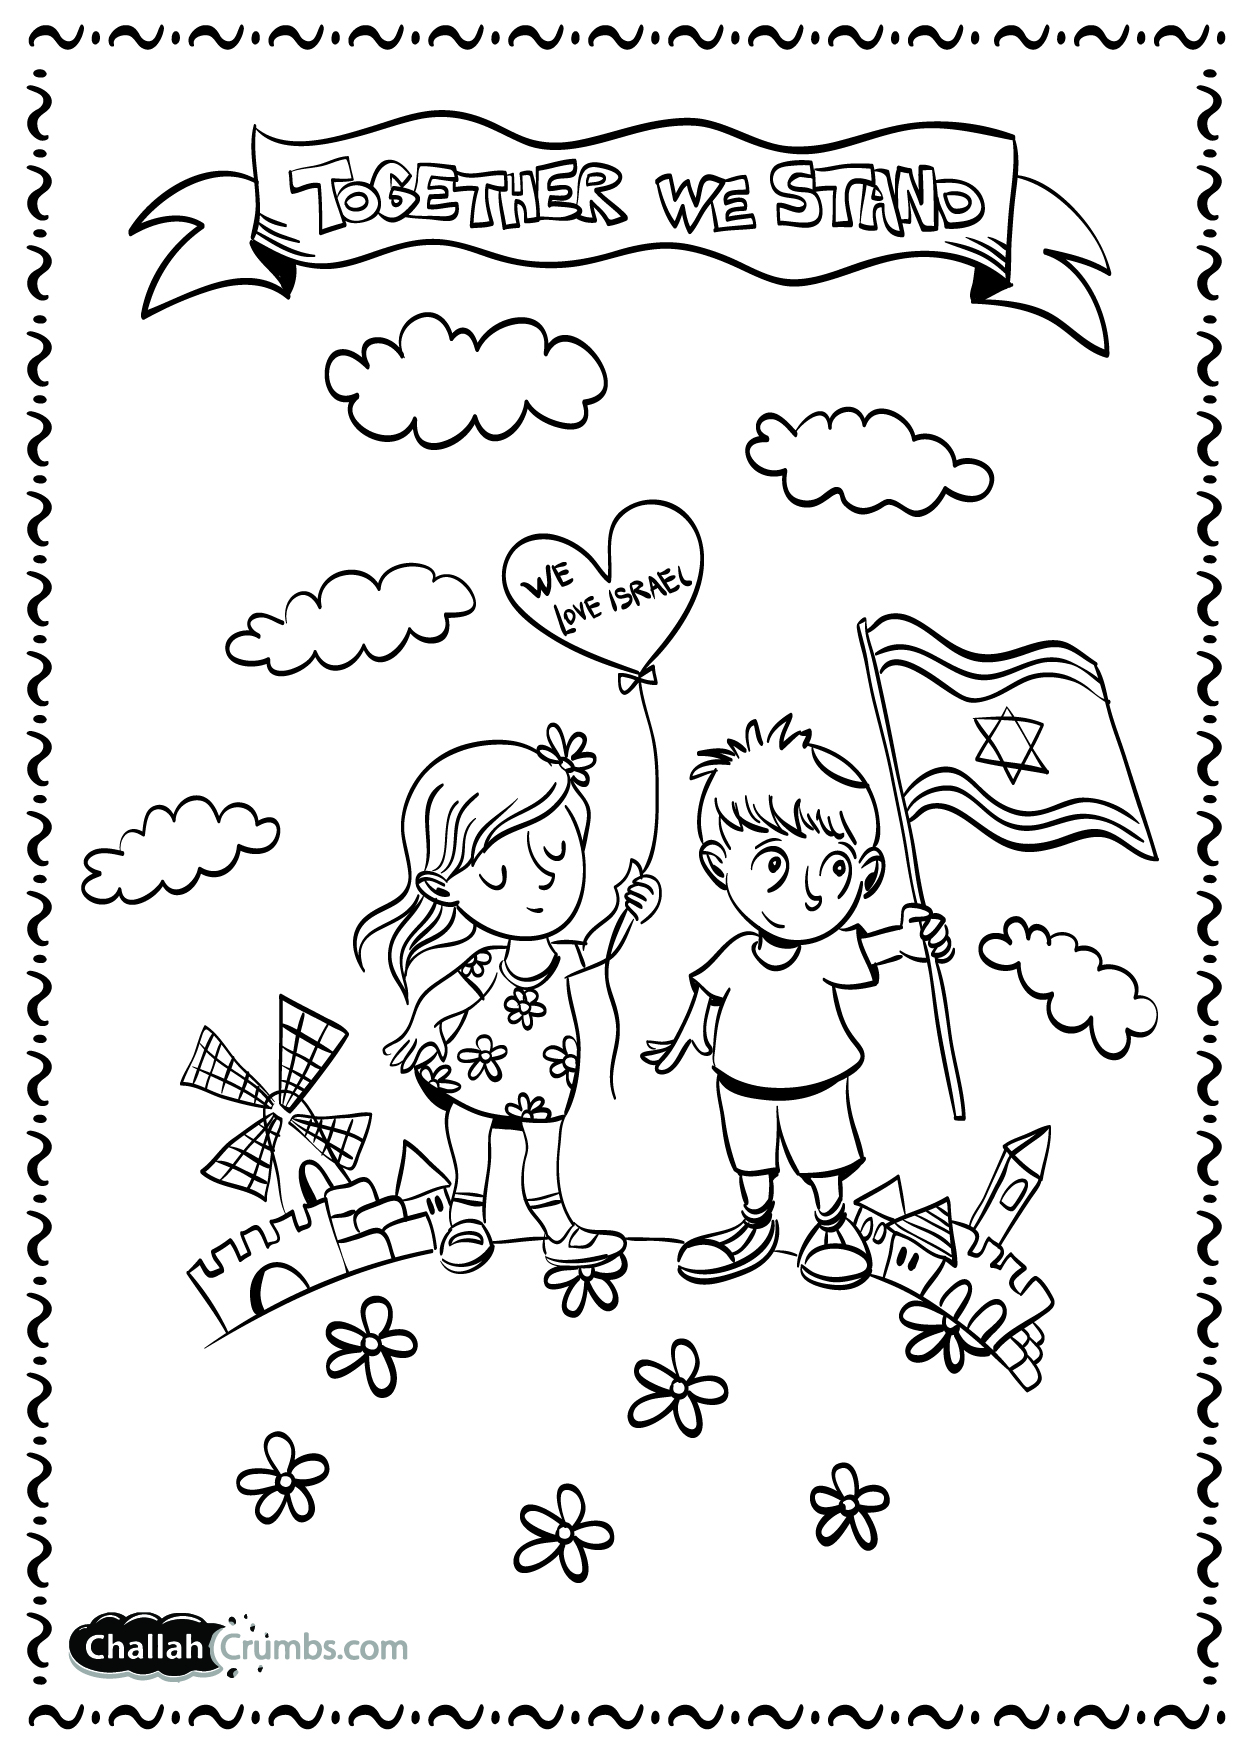 Israel Flag Coloring Page Israel Coloring Page Click On Picture To Print Challah Crumbs